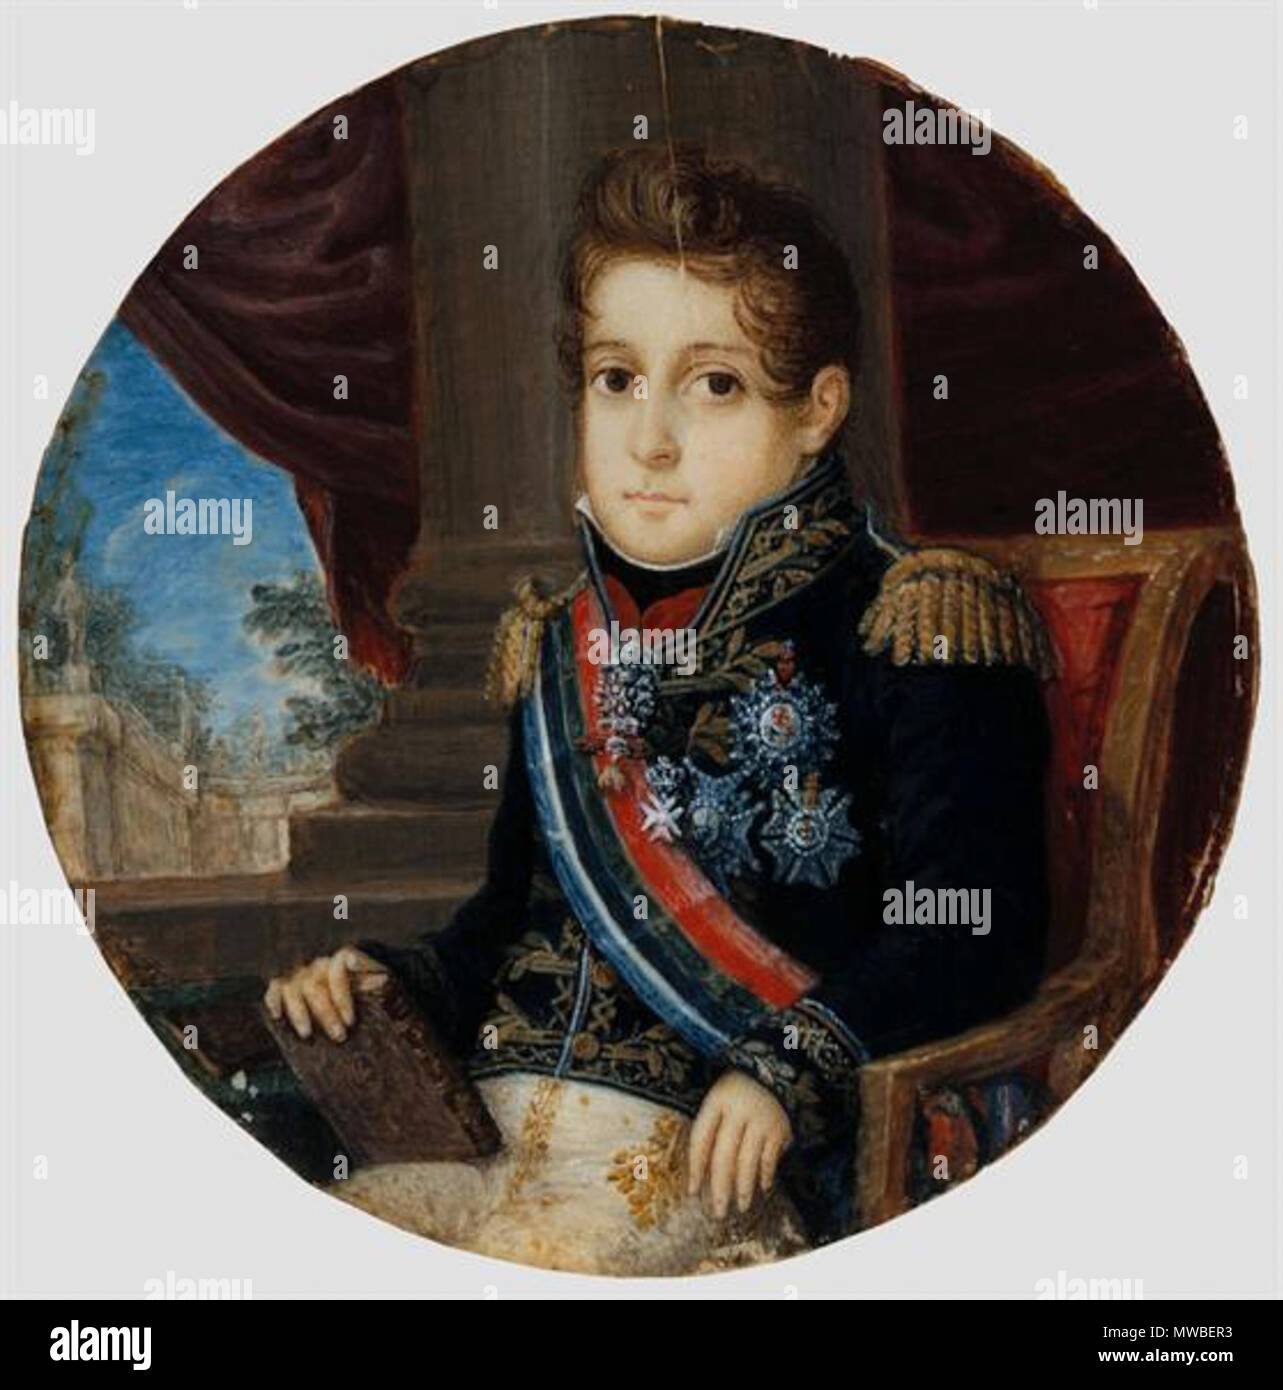 . English: Emperor Dom Pedro I of Brazil (and King Dom Pedro IV of Portugal) around age 11, c.1809. This a later portrait of him, since he is wearing an uniform from the time he was emperor (when he was a child the uniforms were red, not blue). It is located in the Museu Nacional de Arte Antiga. circa 1809. Unknown (18??-18??) 166 Dom Pedro I 1809d Stock Photo